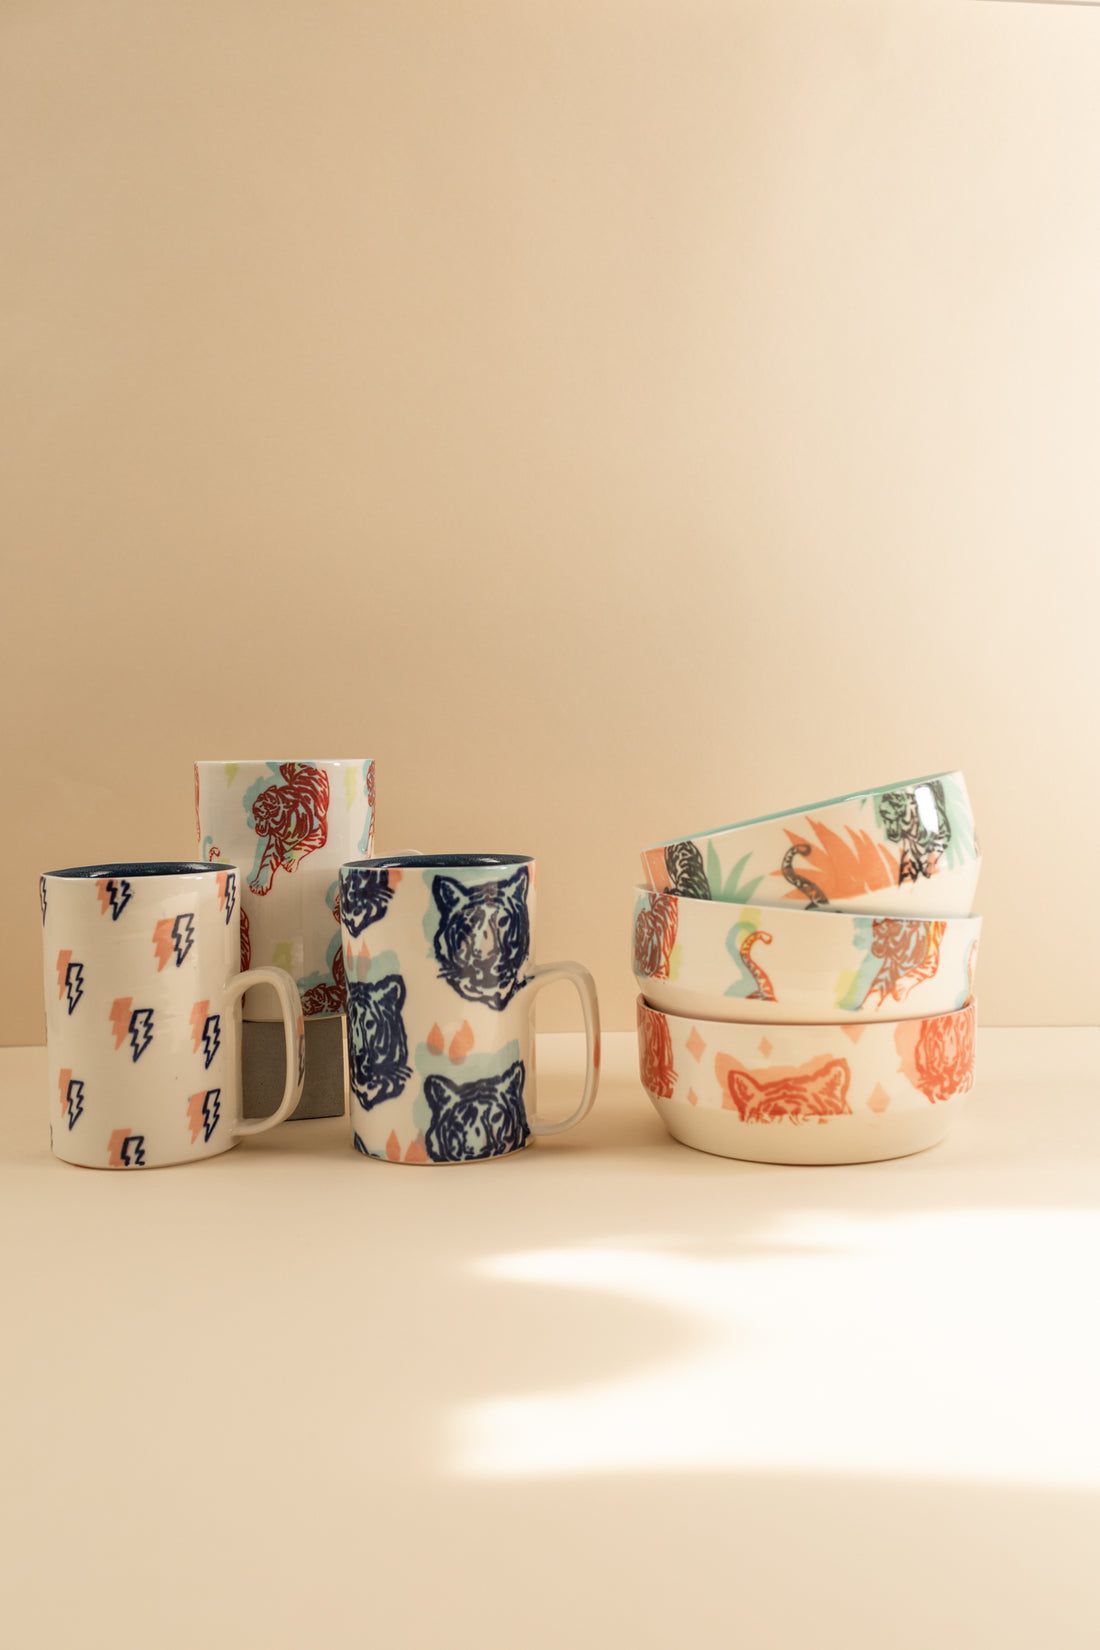 A variety of bowls and mugs with an assortment of tiger prints